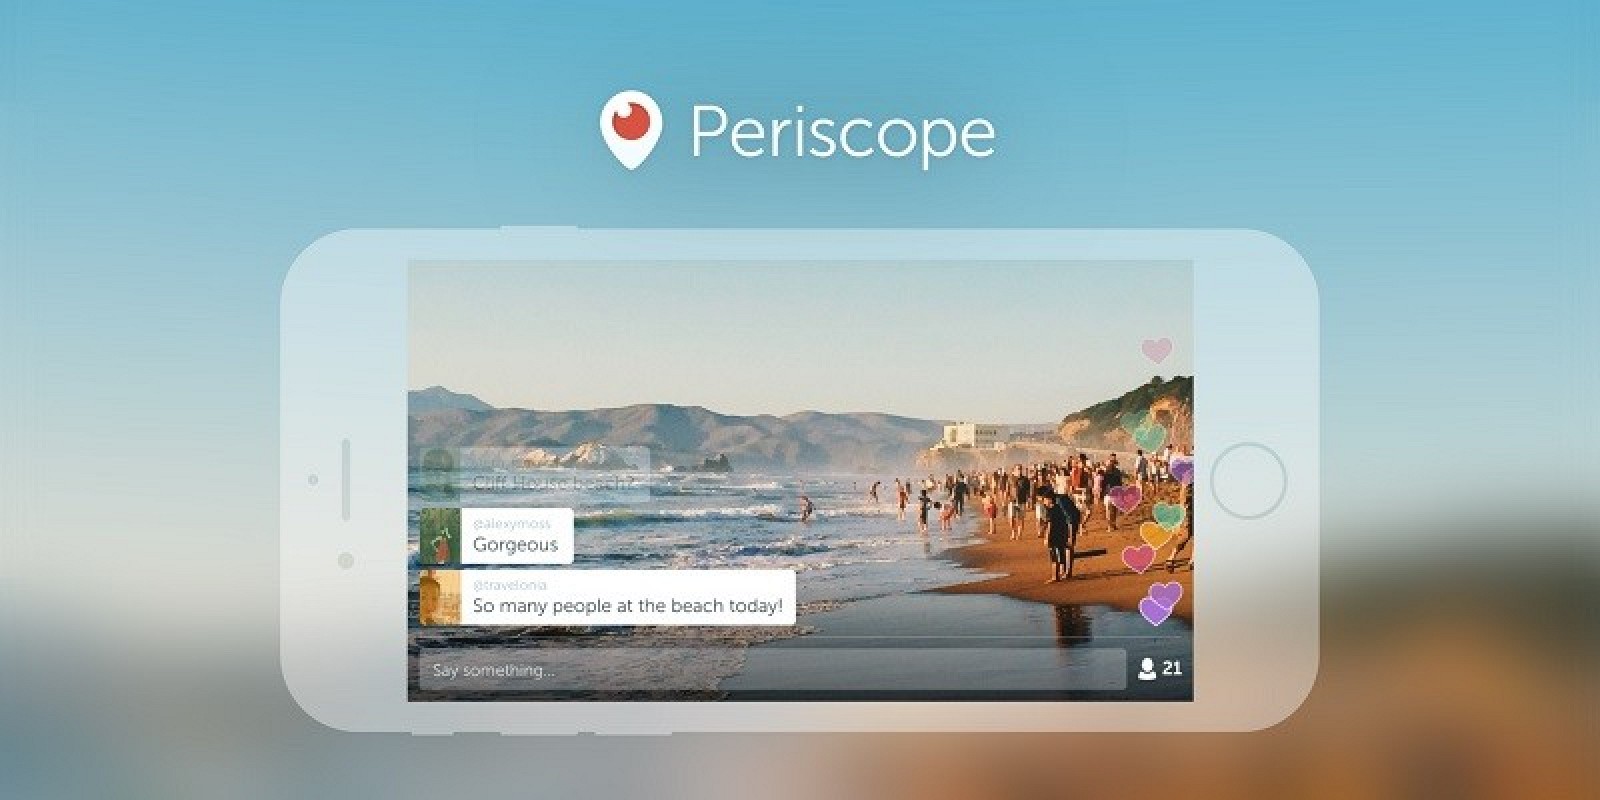 Periscope is a reliable live-streaming apps that managed to create a buzz around the whole idea. Image Credit: LemonLightMedia